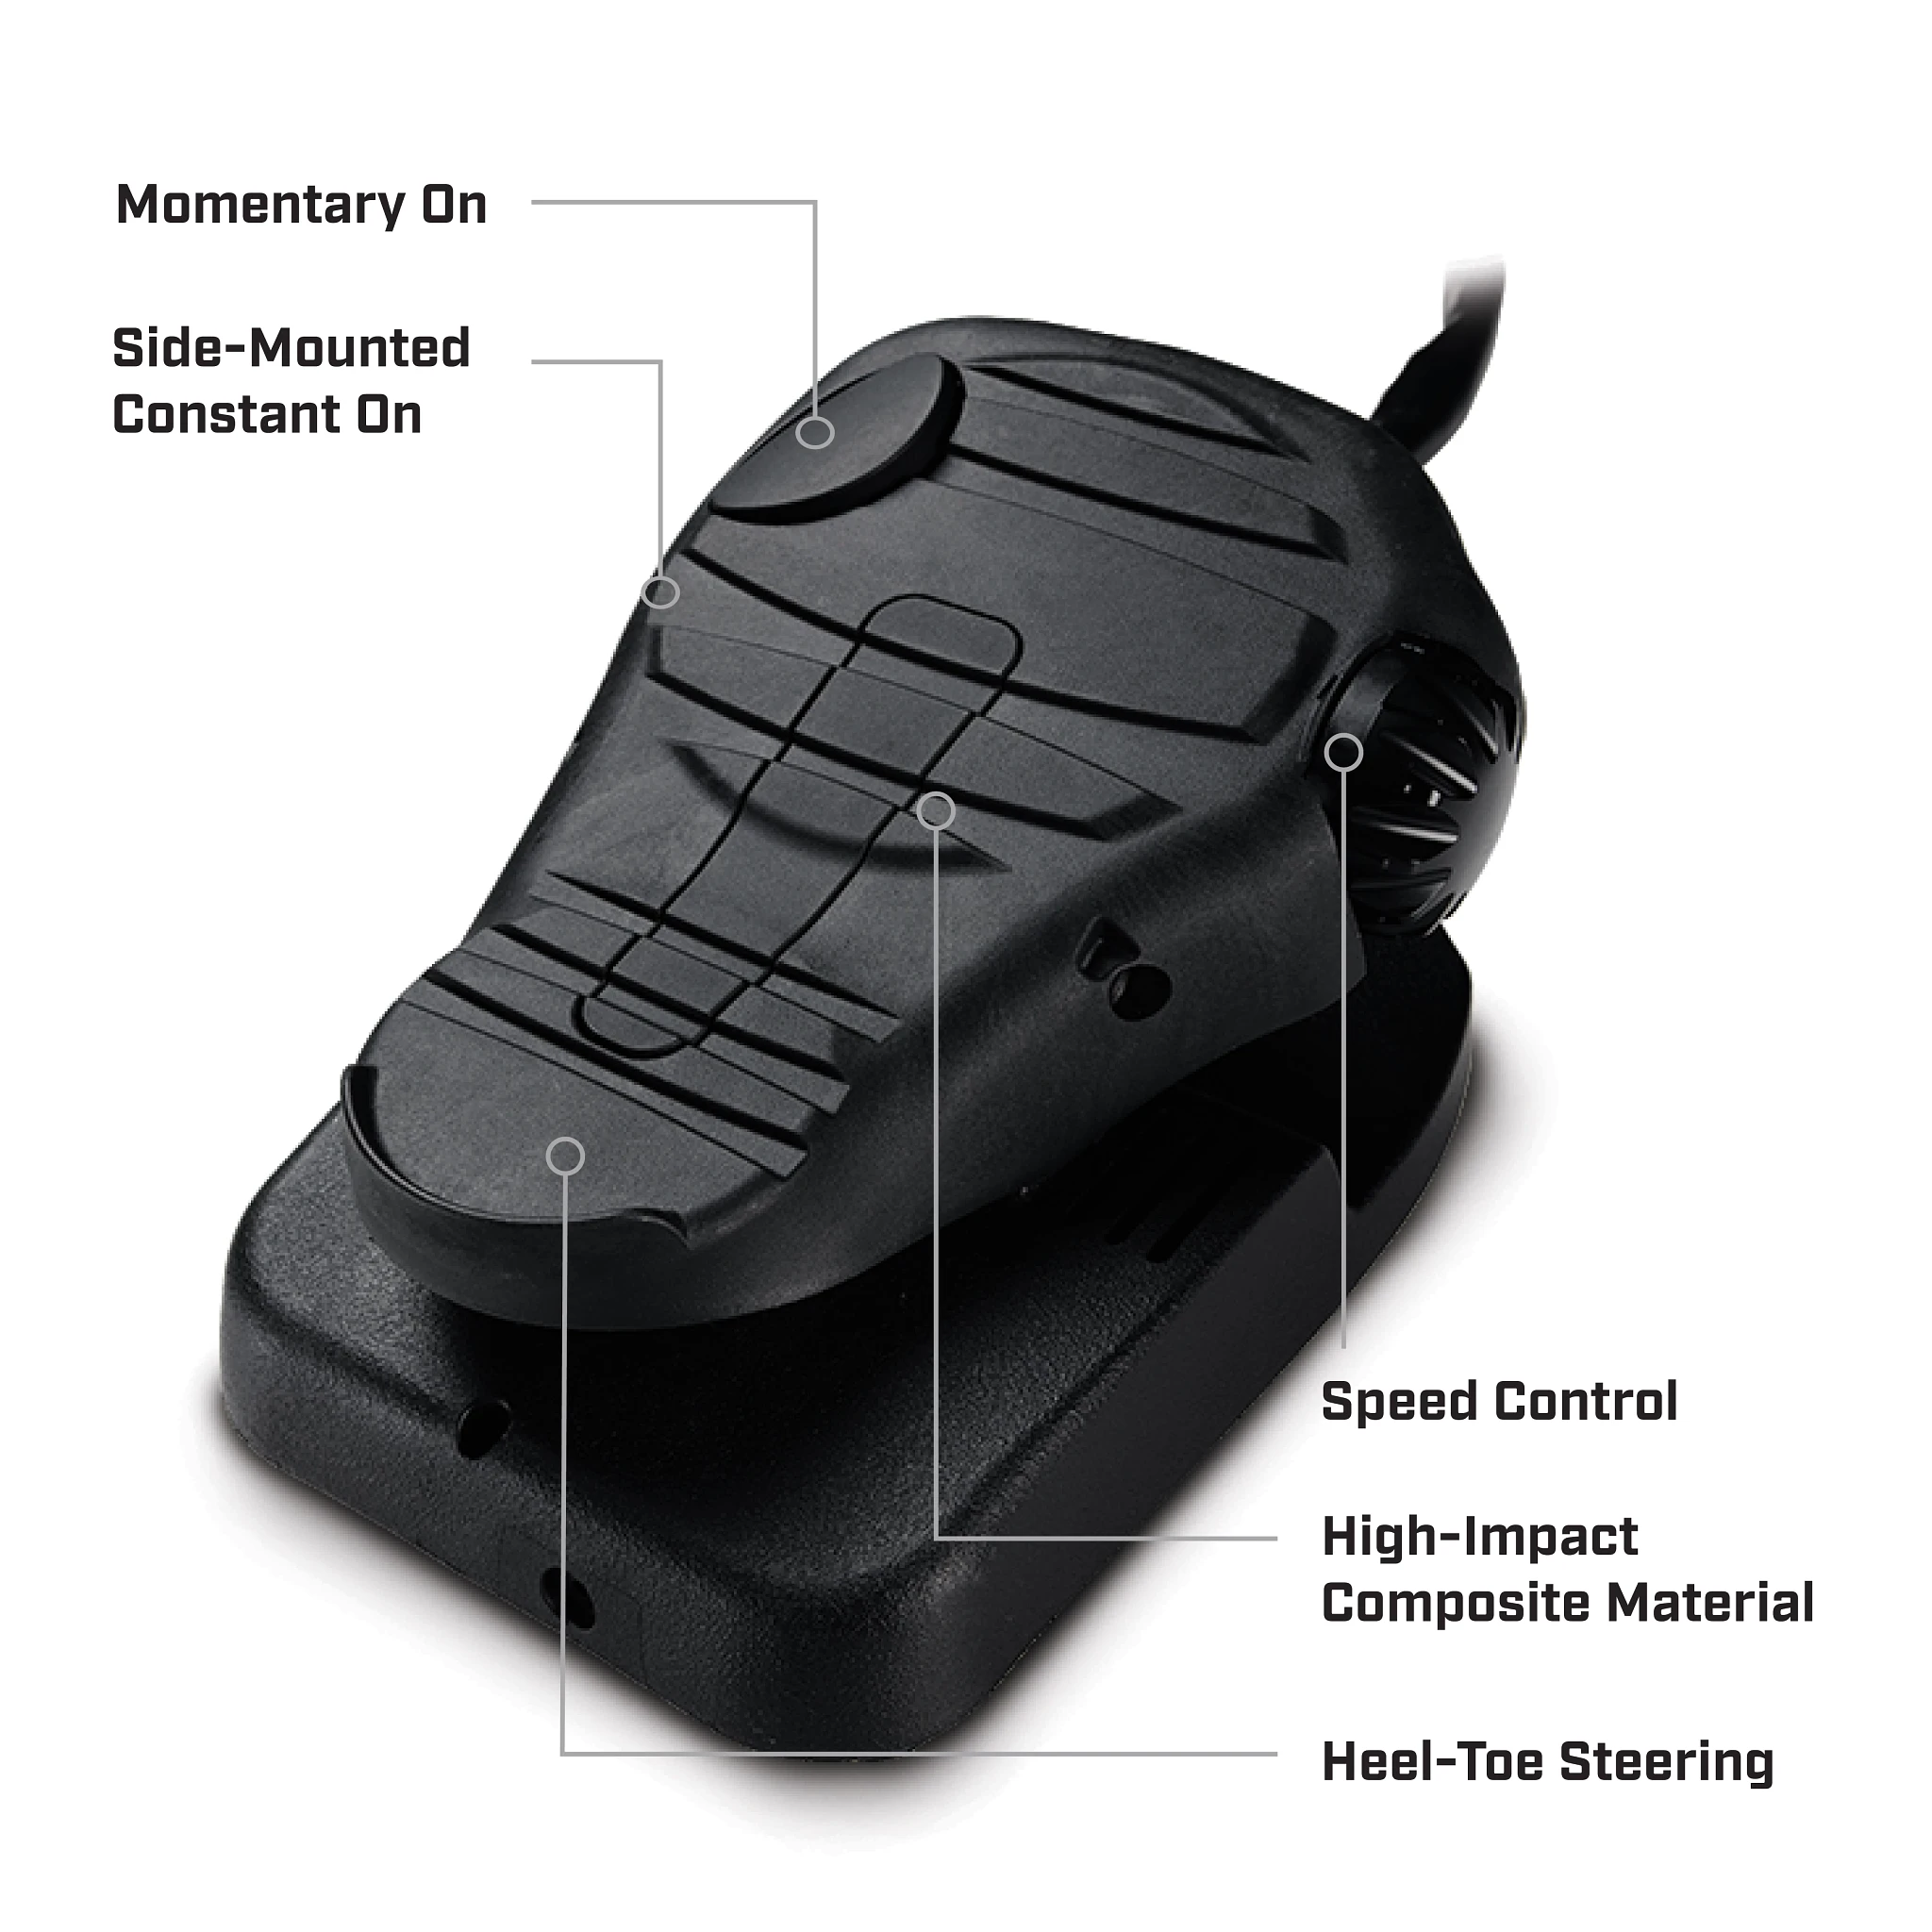 Maxxum foot pedal with feature callouts